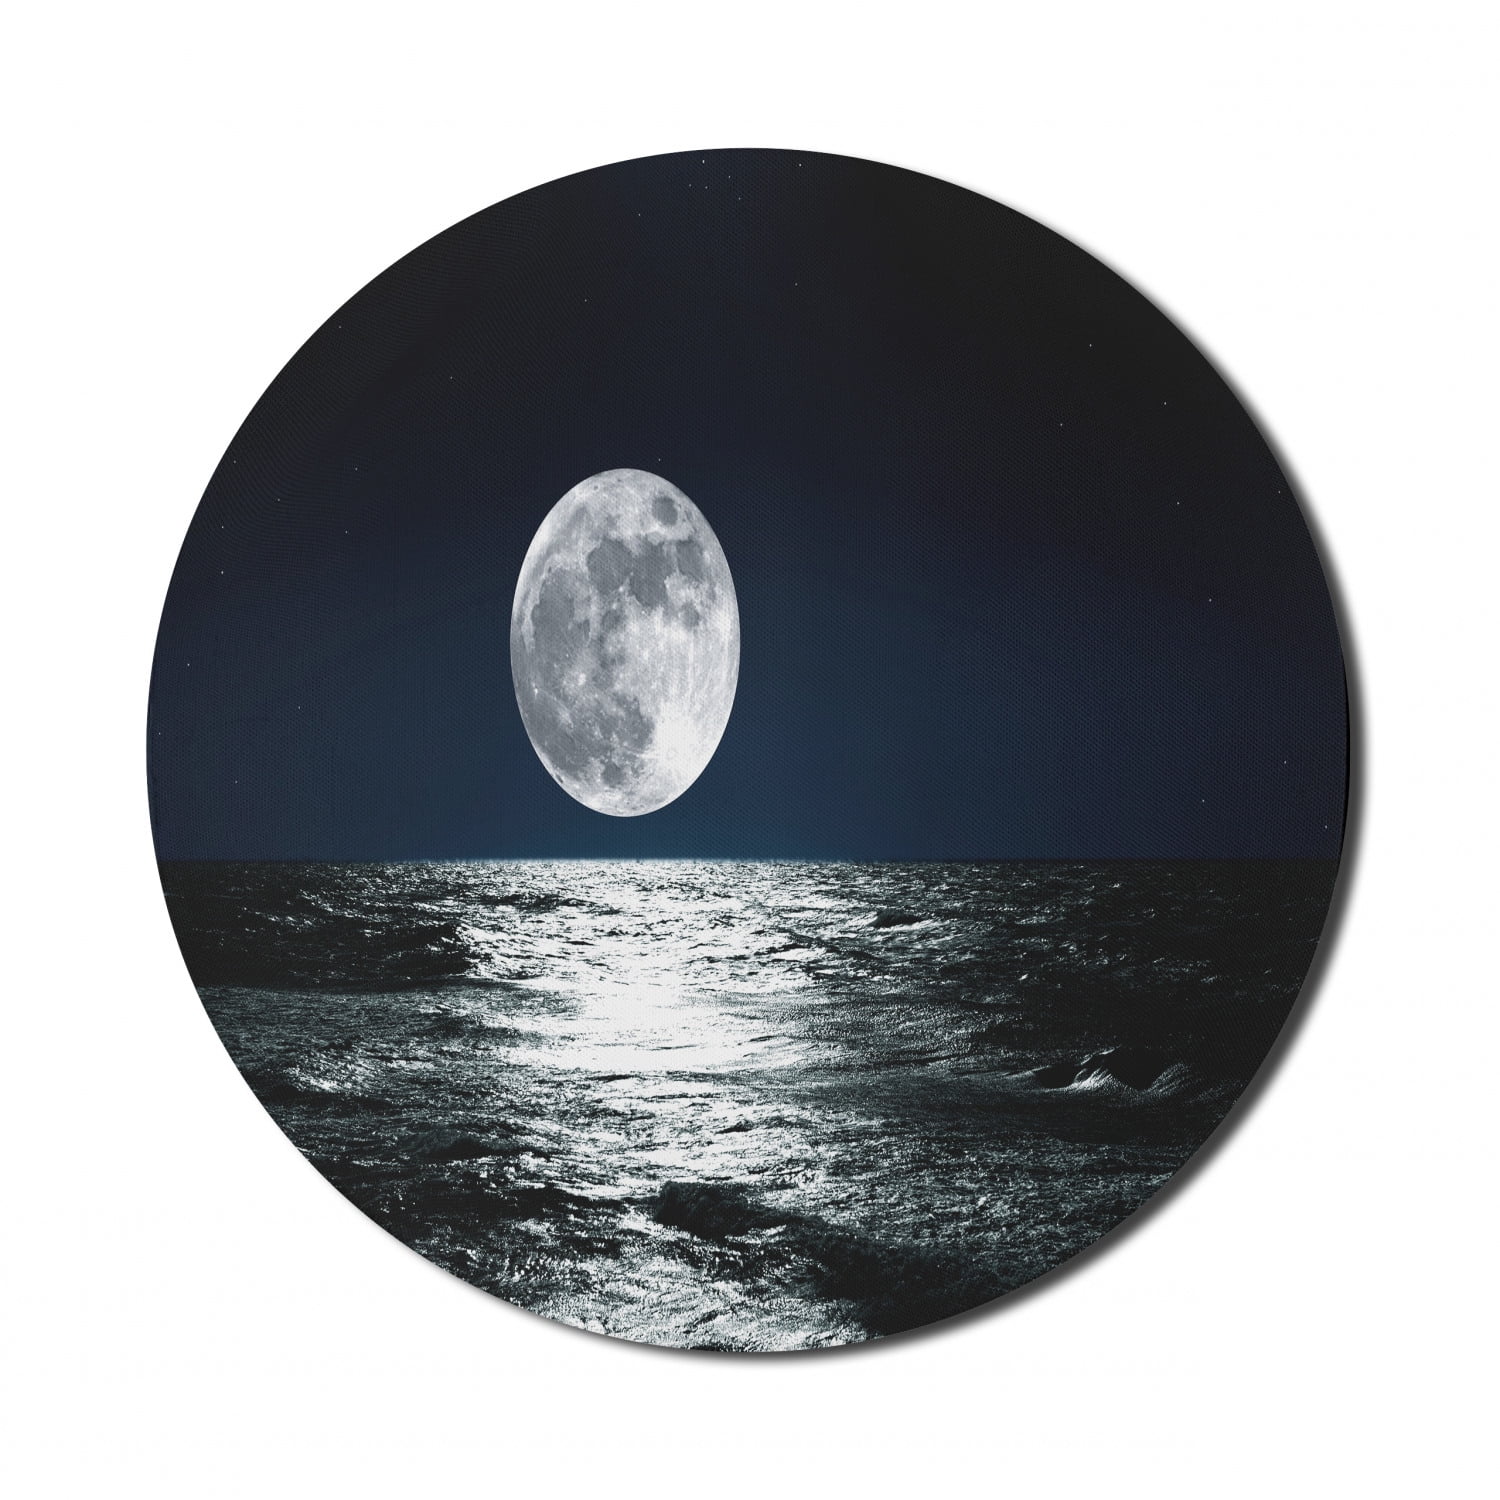 Mouse Mat Square Waterproof Mouse Pad Non-Slip Rubber Base MousePads for Computer Laptop Men Women Kids Moon Illuminating The Clear Blue Ocean Design Mouse Pad Ocean and Moon Mouse Pad 